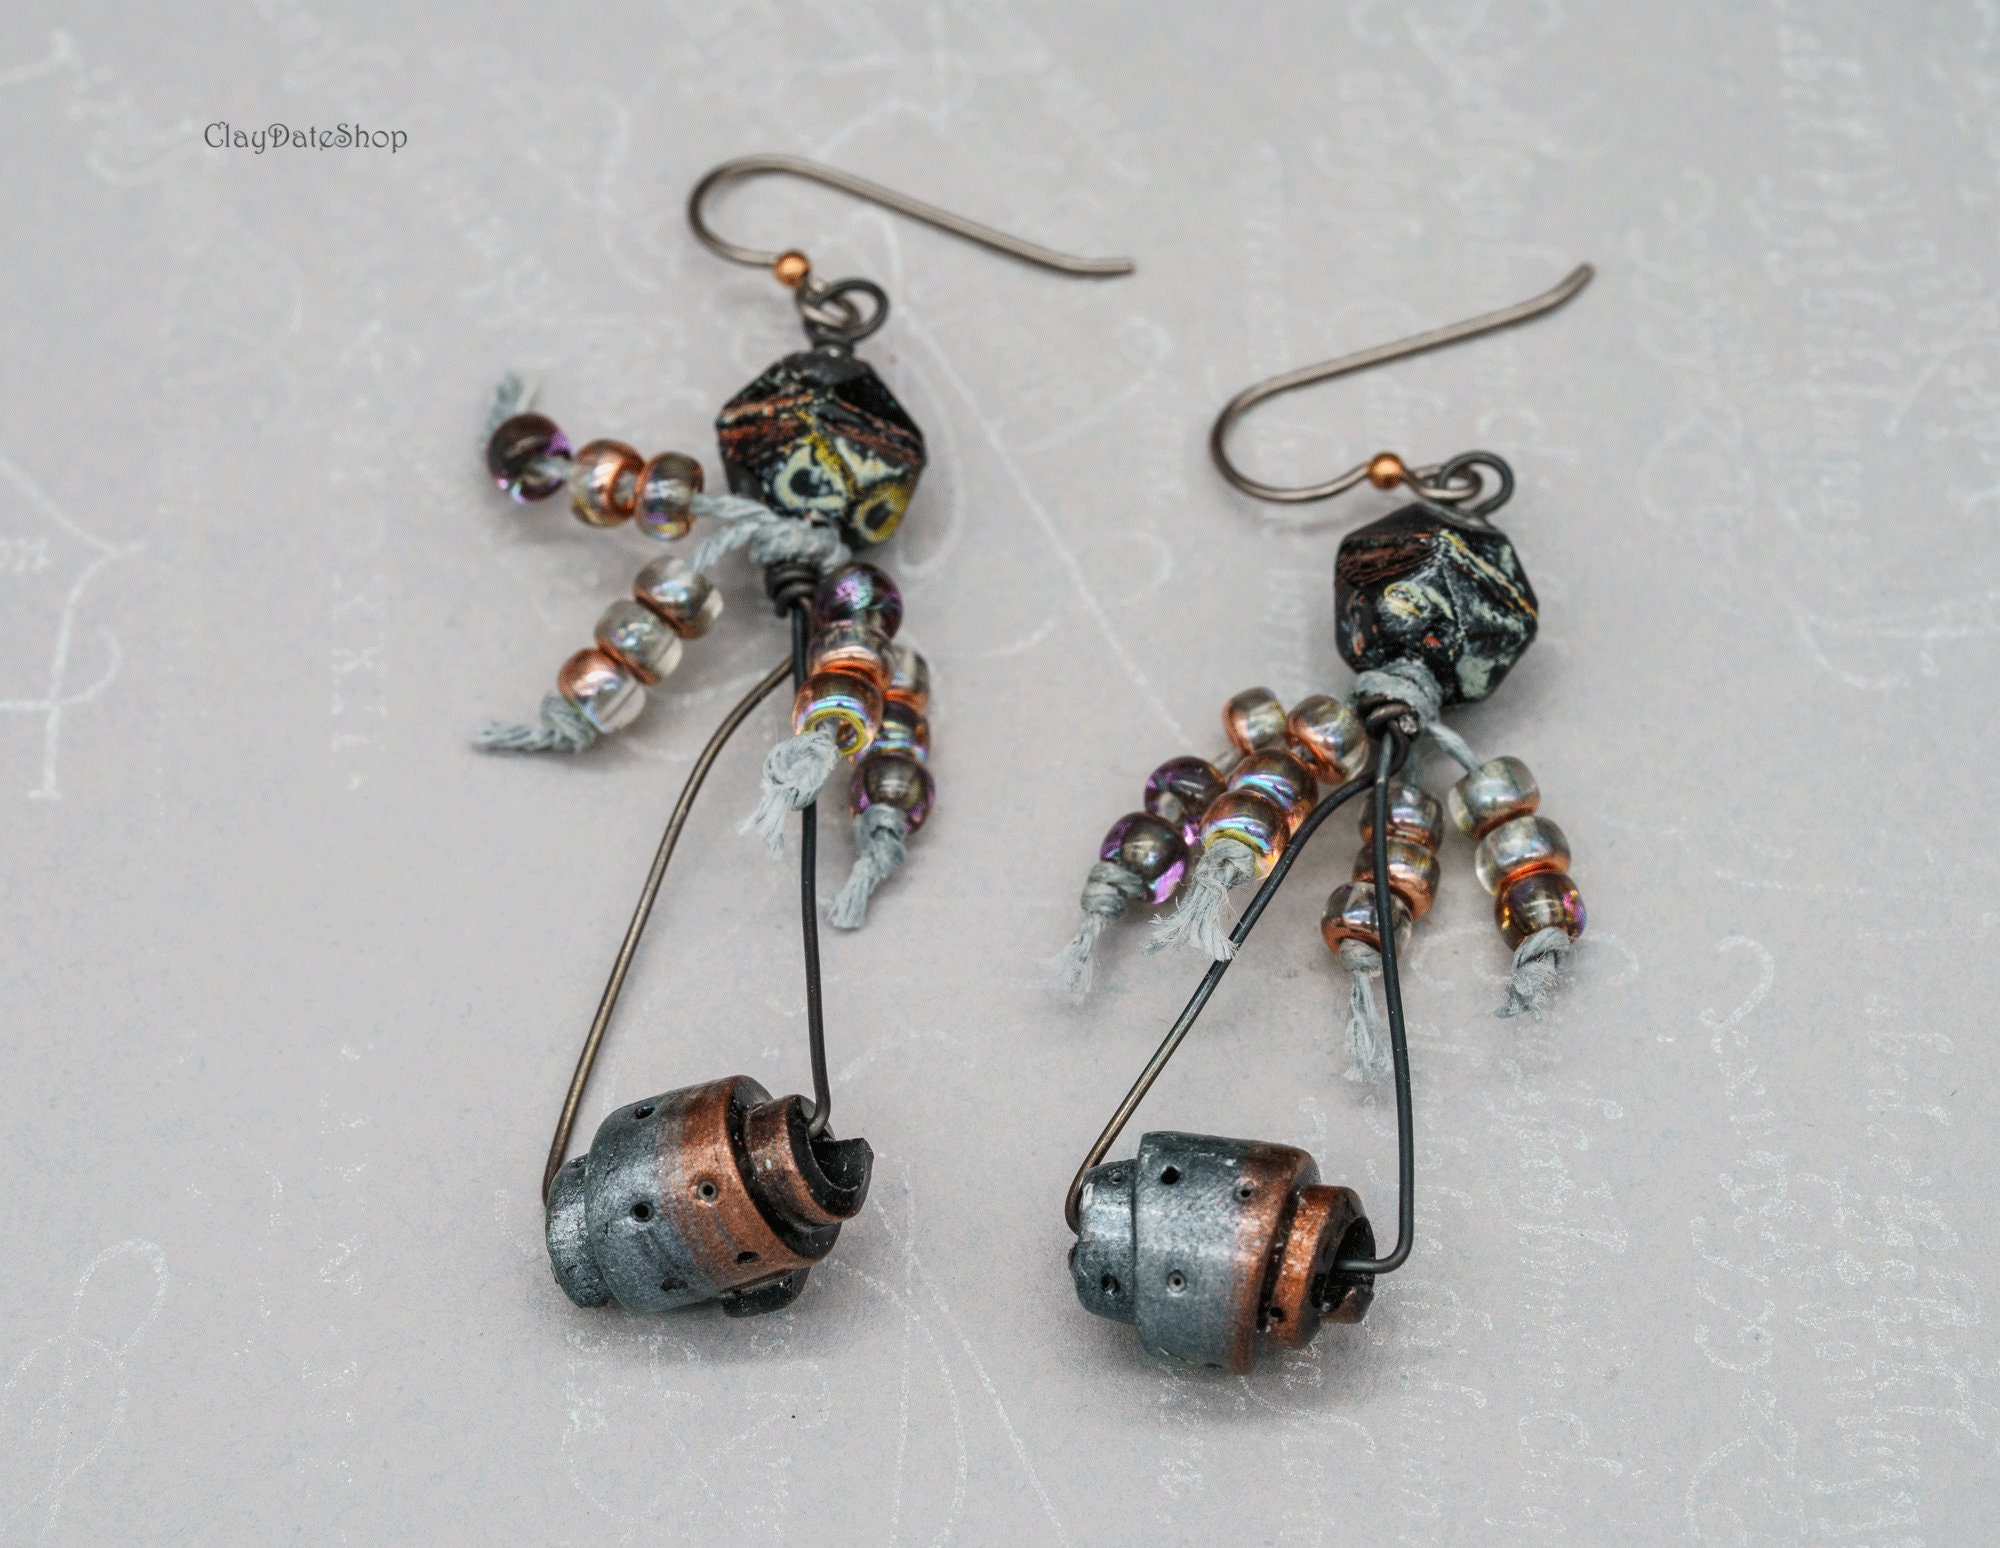 Asymmetrical Enamel Drop Earrings with Silver Nugget Ear Wires in Aqua or Coffee - My Brown Wren Jewelry and Jewelry Making Tutorials